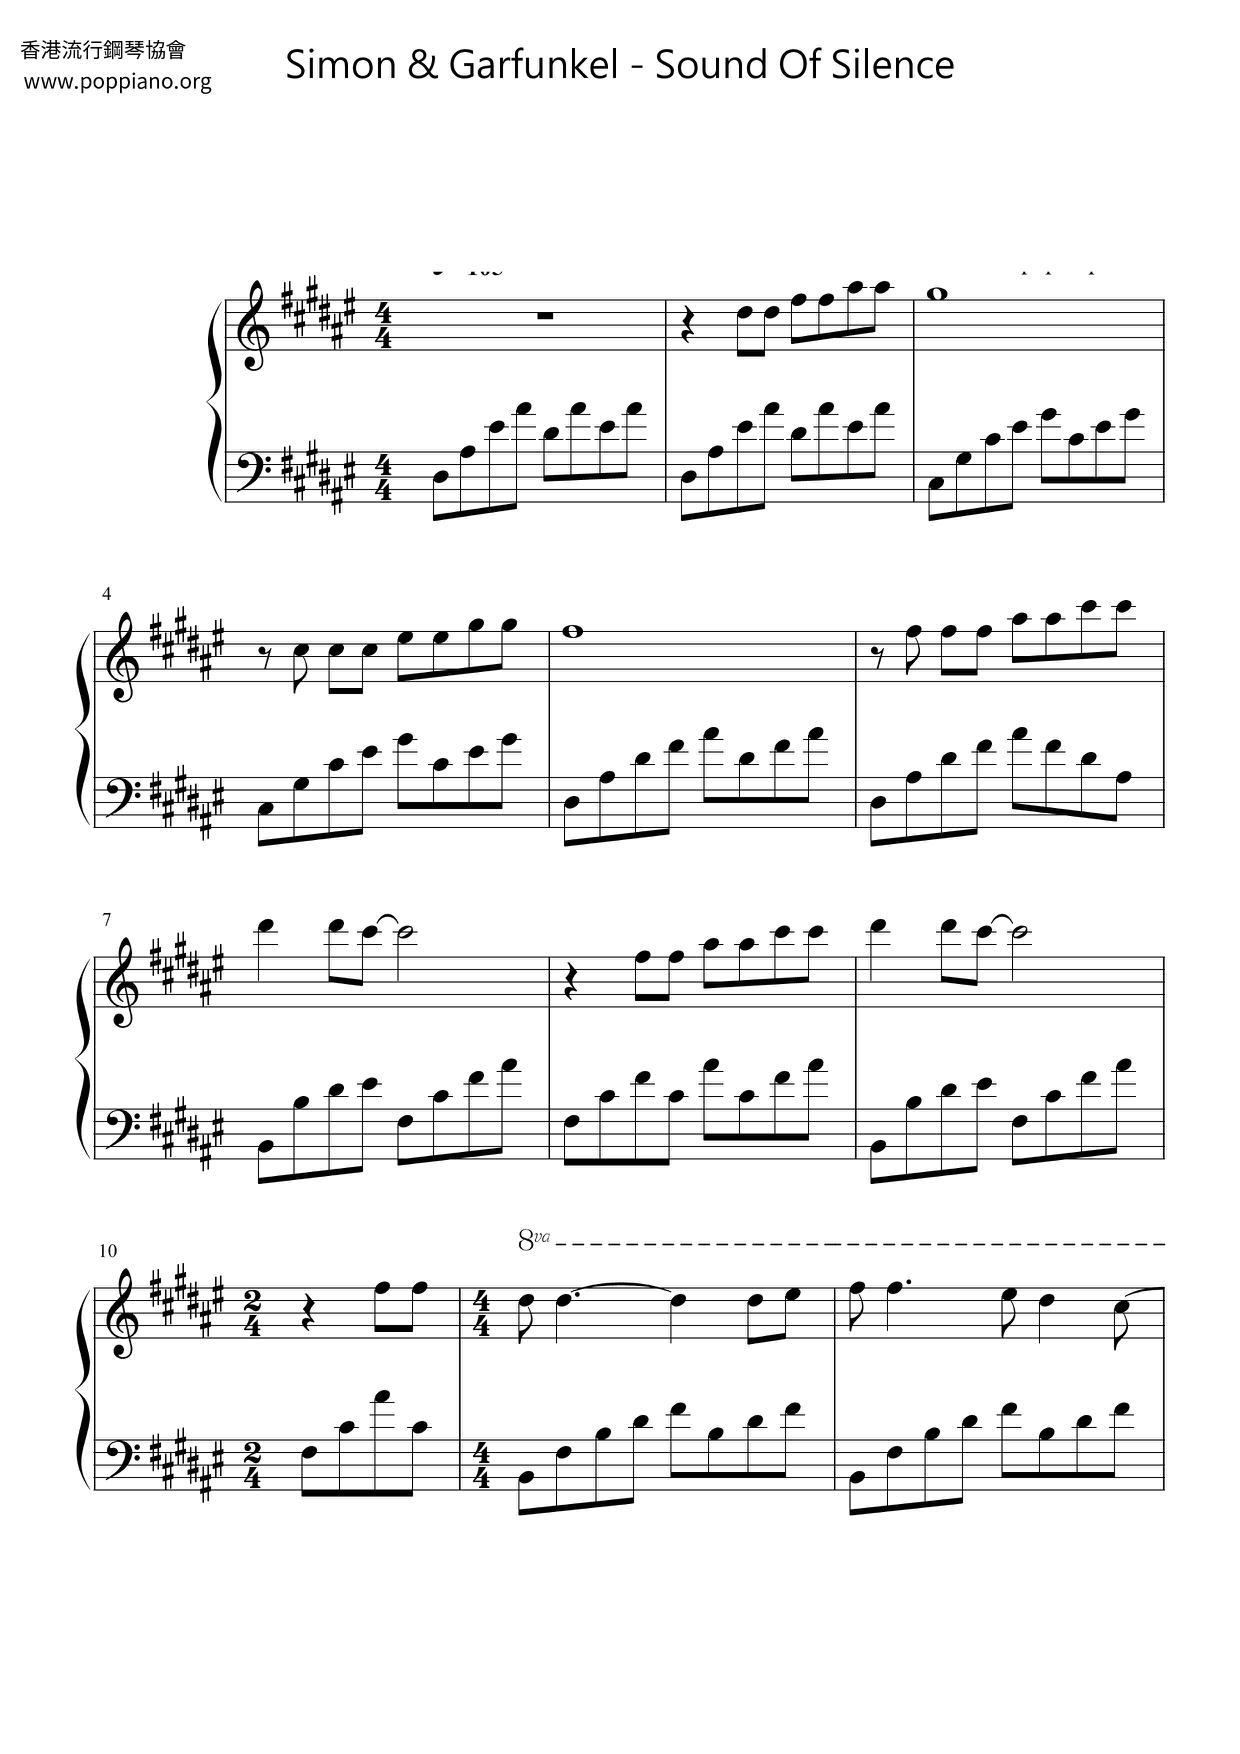 The Sound Of Silence Score